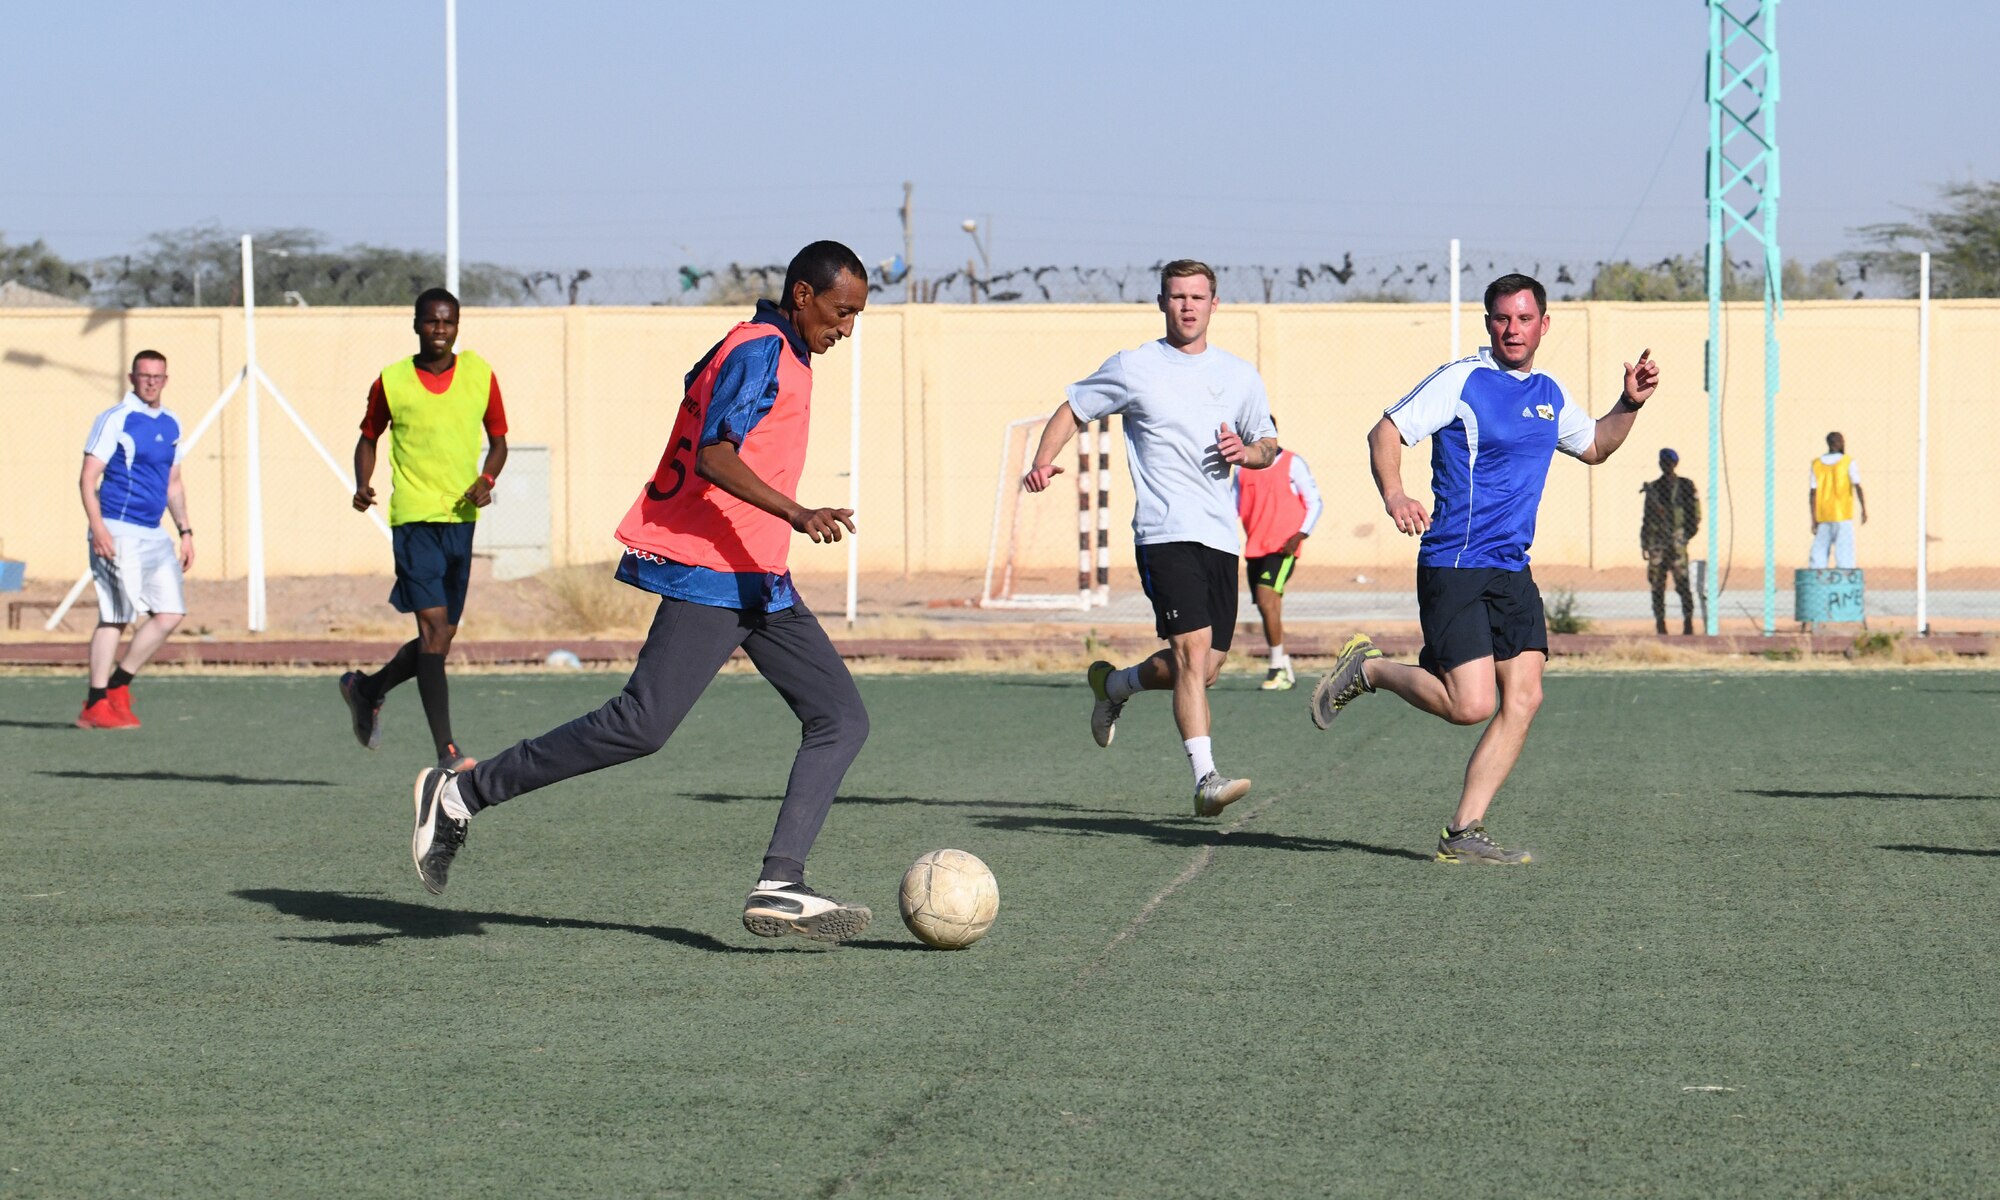 Photo of U.S. military and local team playing soccer.